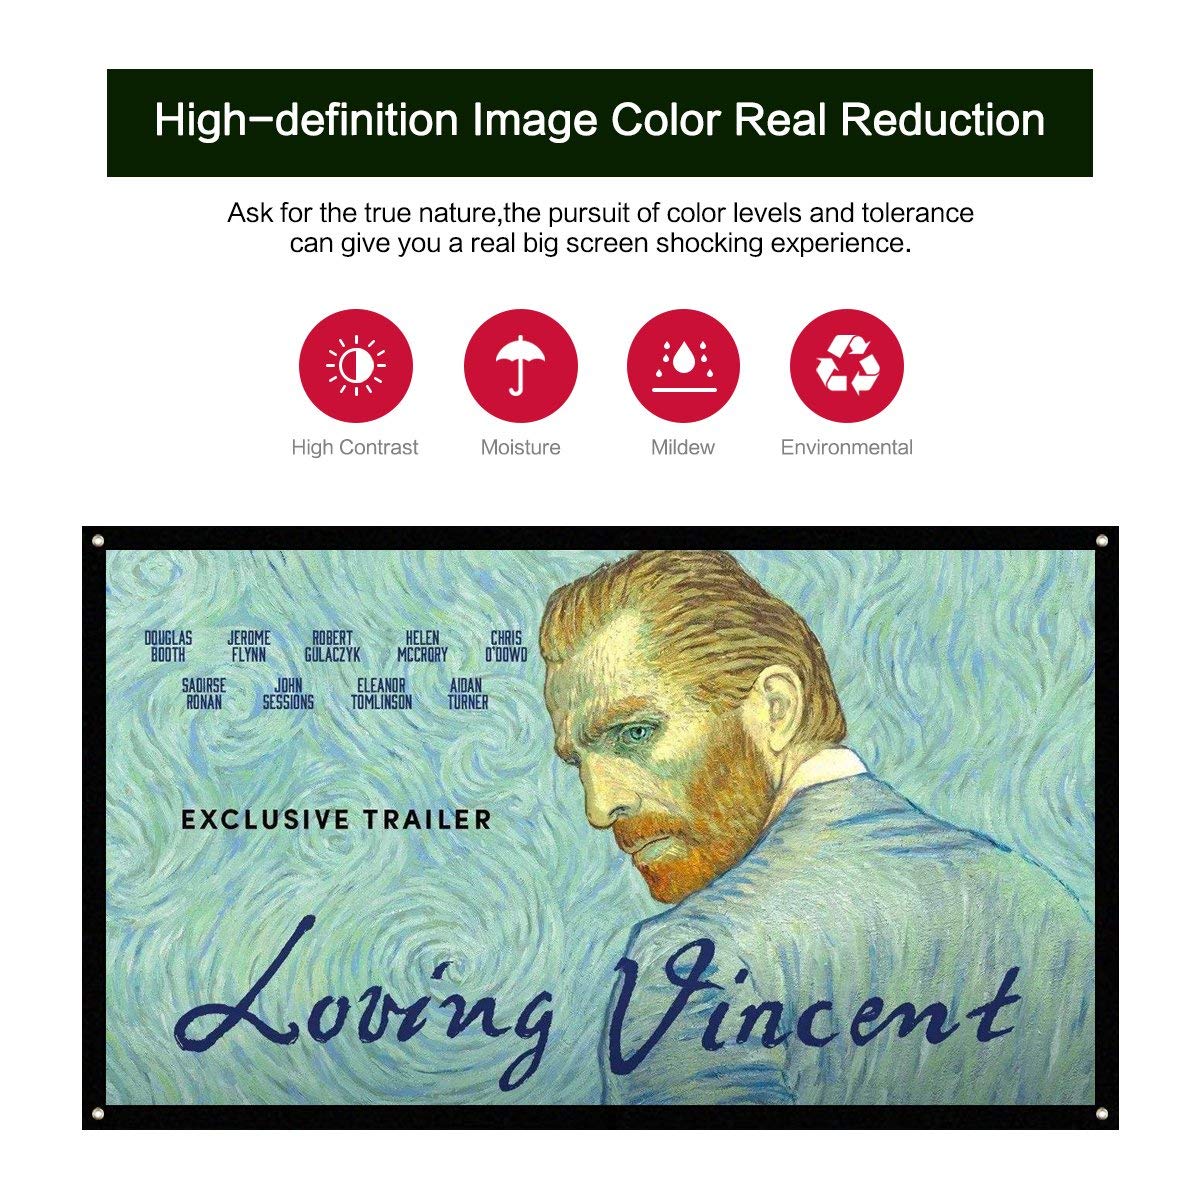 high definition image color real reduction